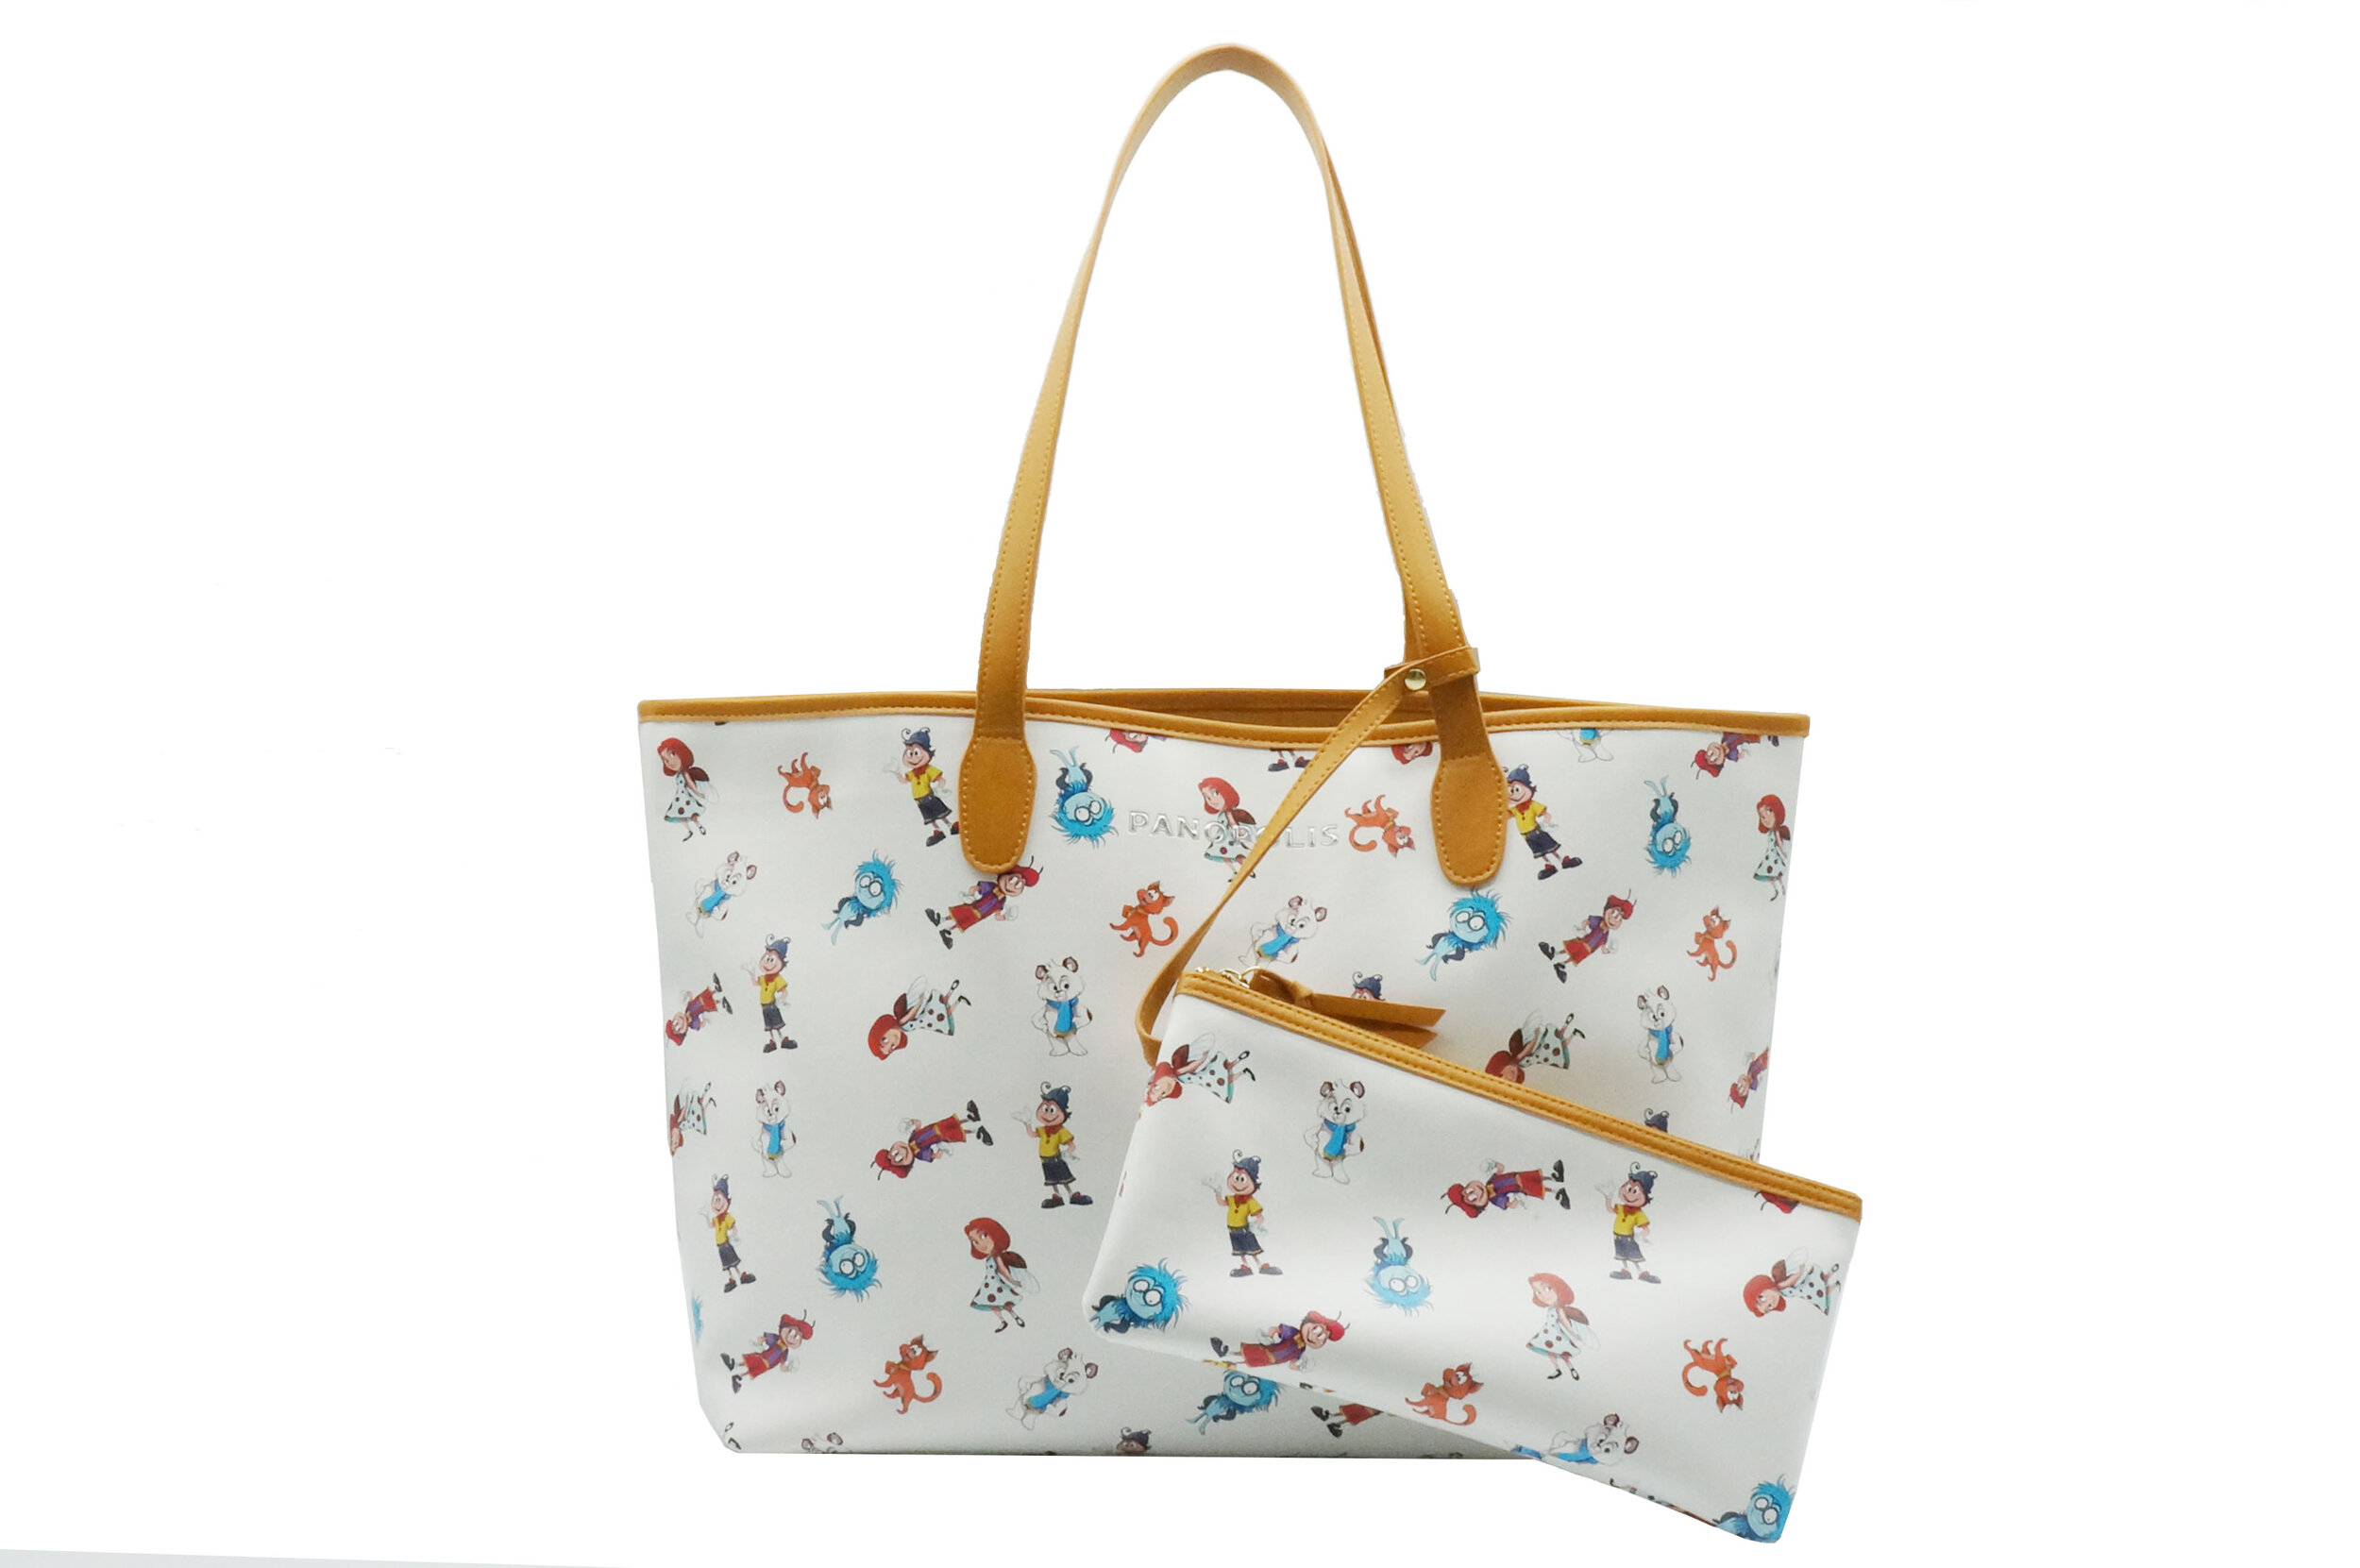 08.Tote bag with pouch.jpg